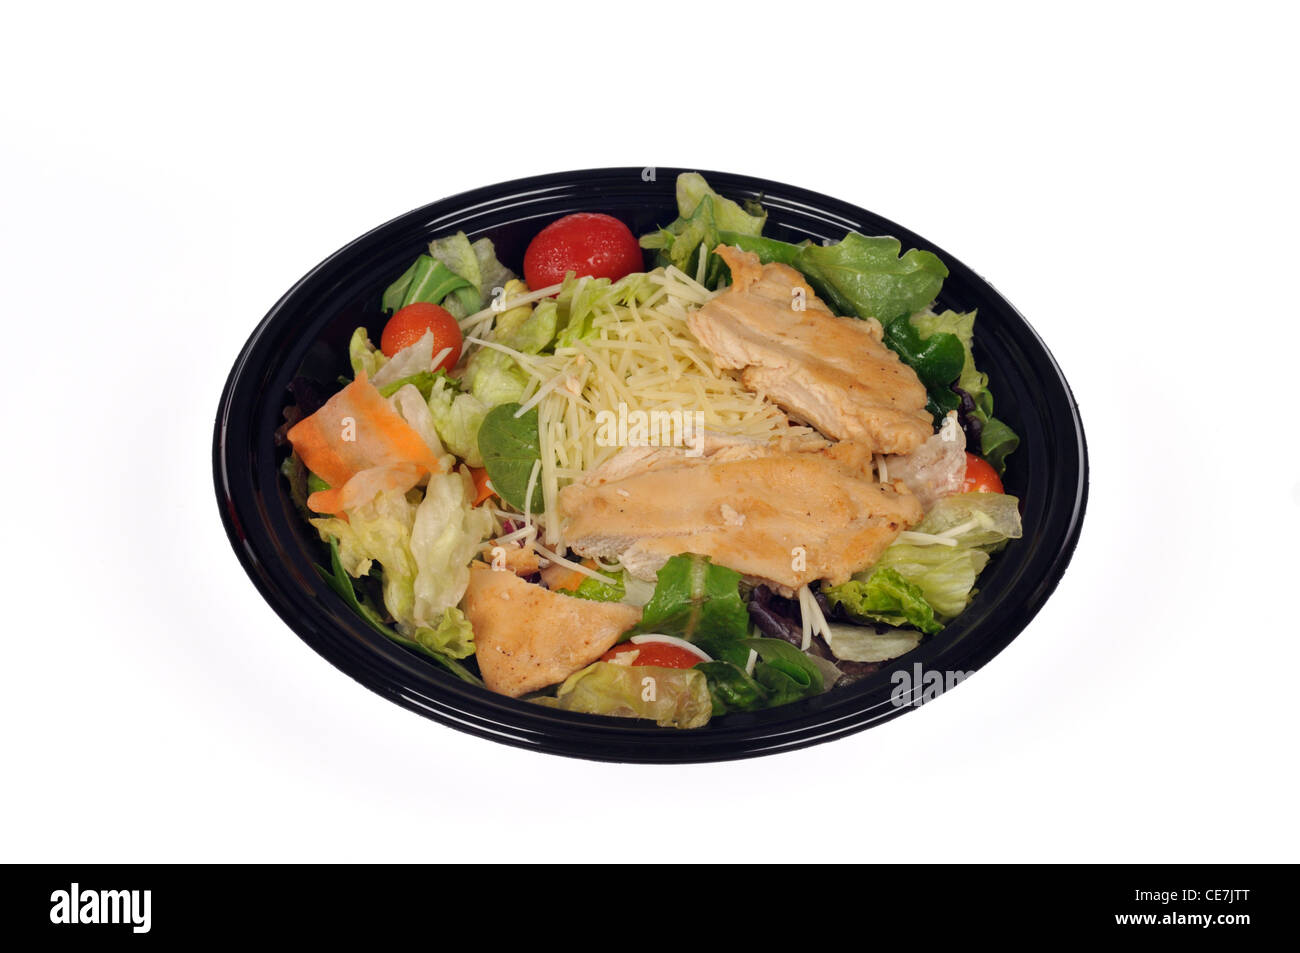 McDonalds grilled chicken caesar salad in black plastic takeaway container on white background cutout. Stock Photo